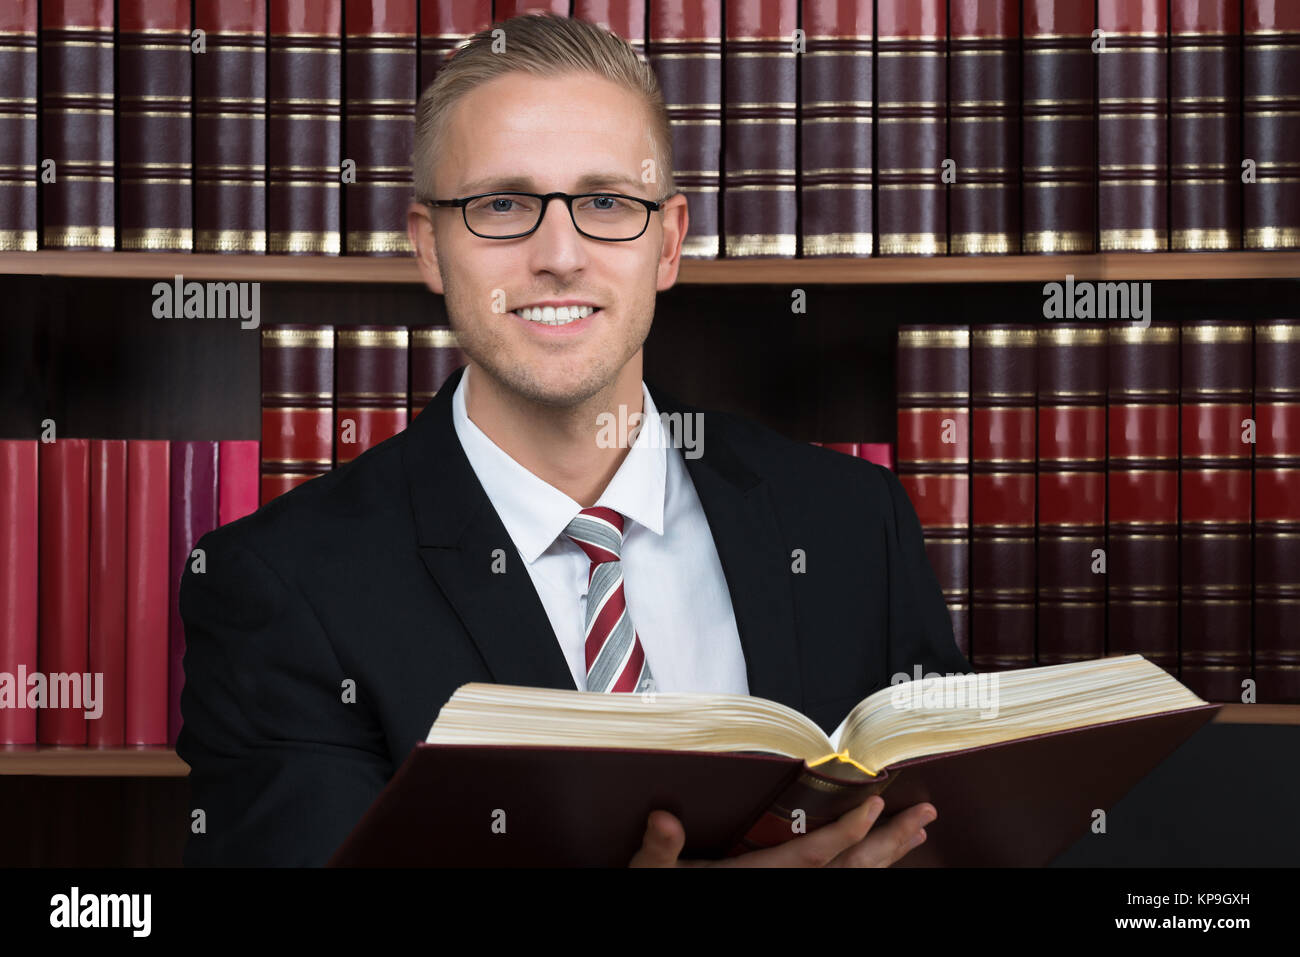 Lawyer Reading Book At Courtroom Stock Photo